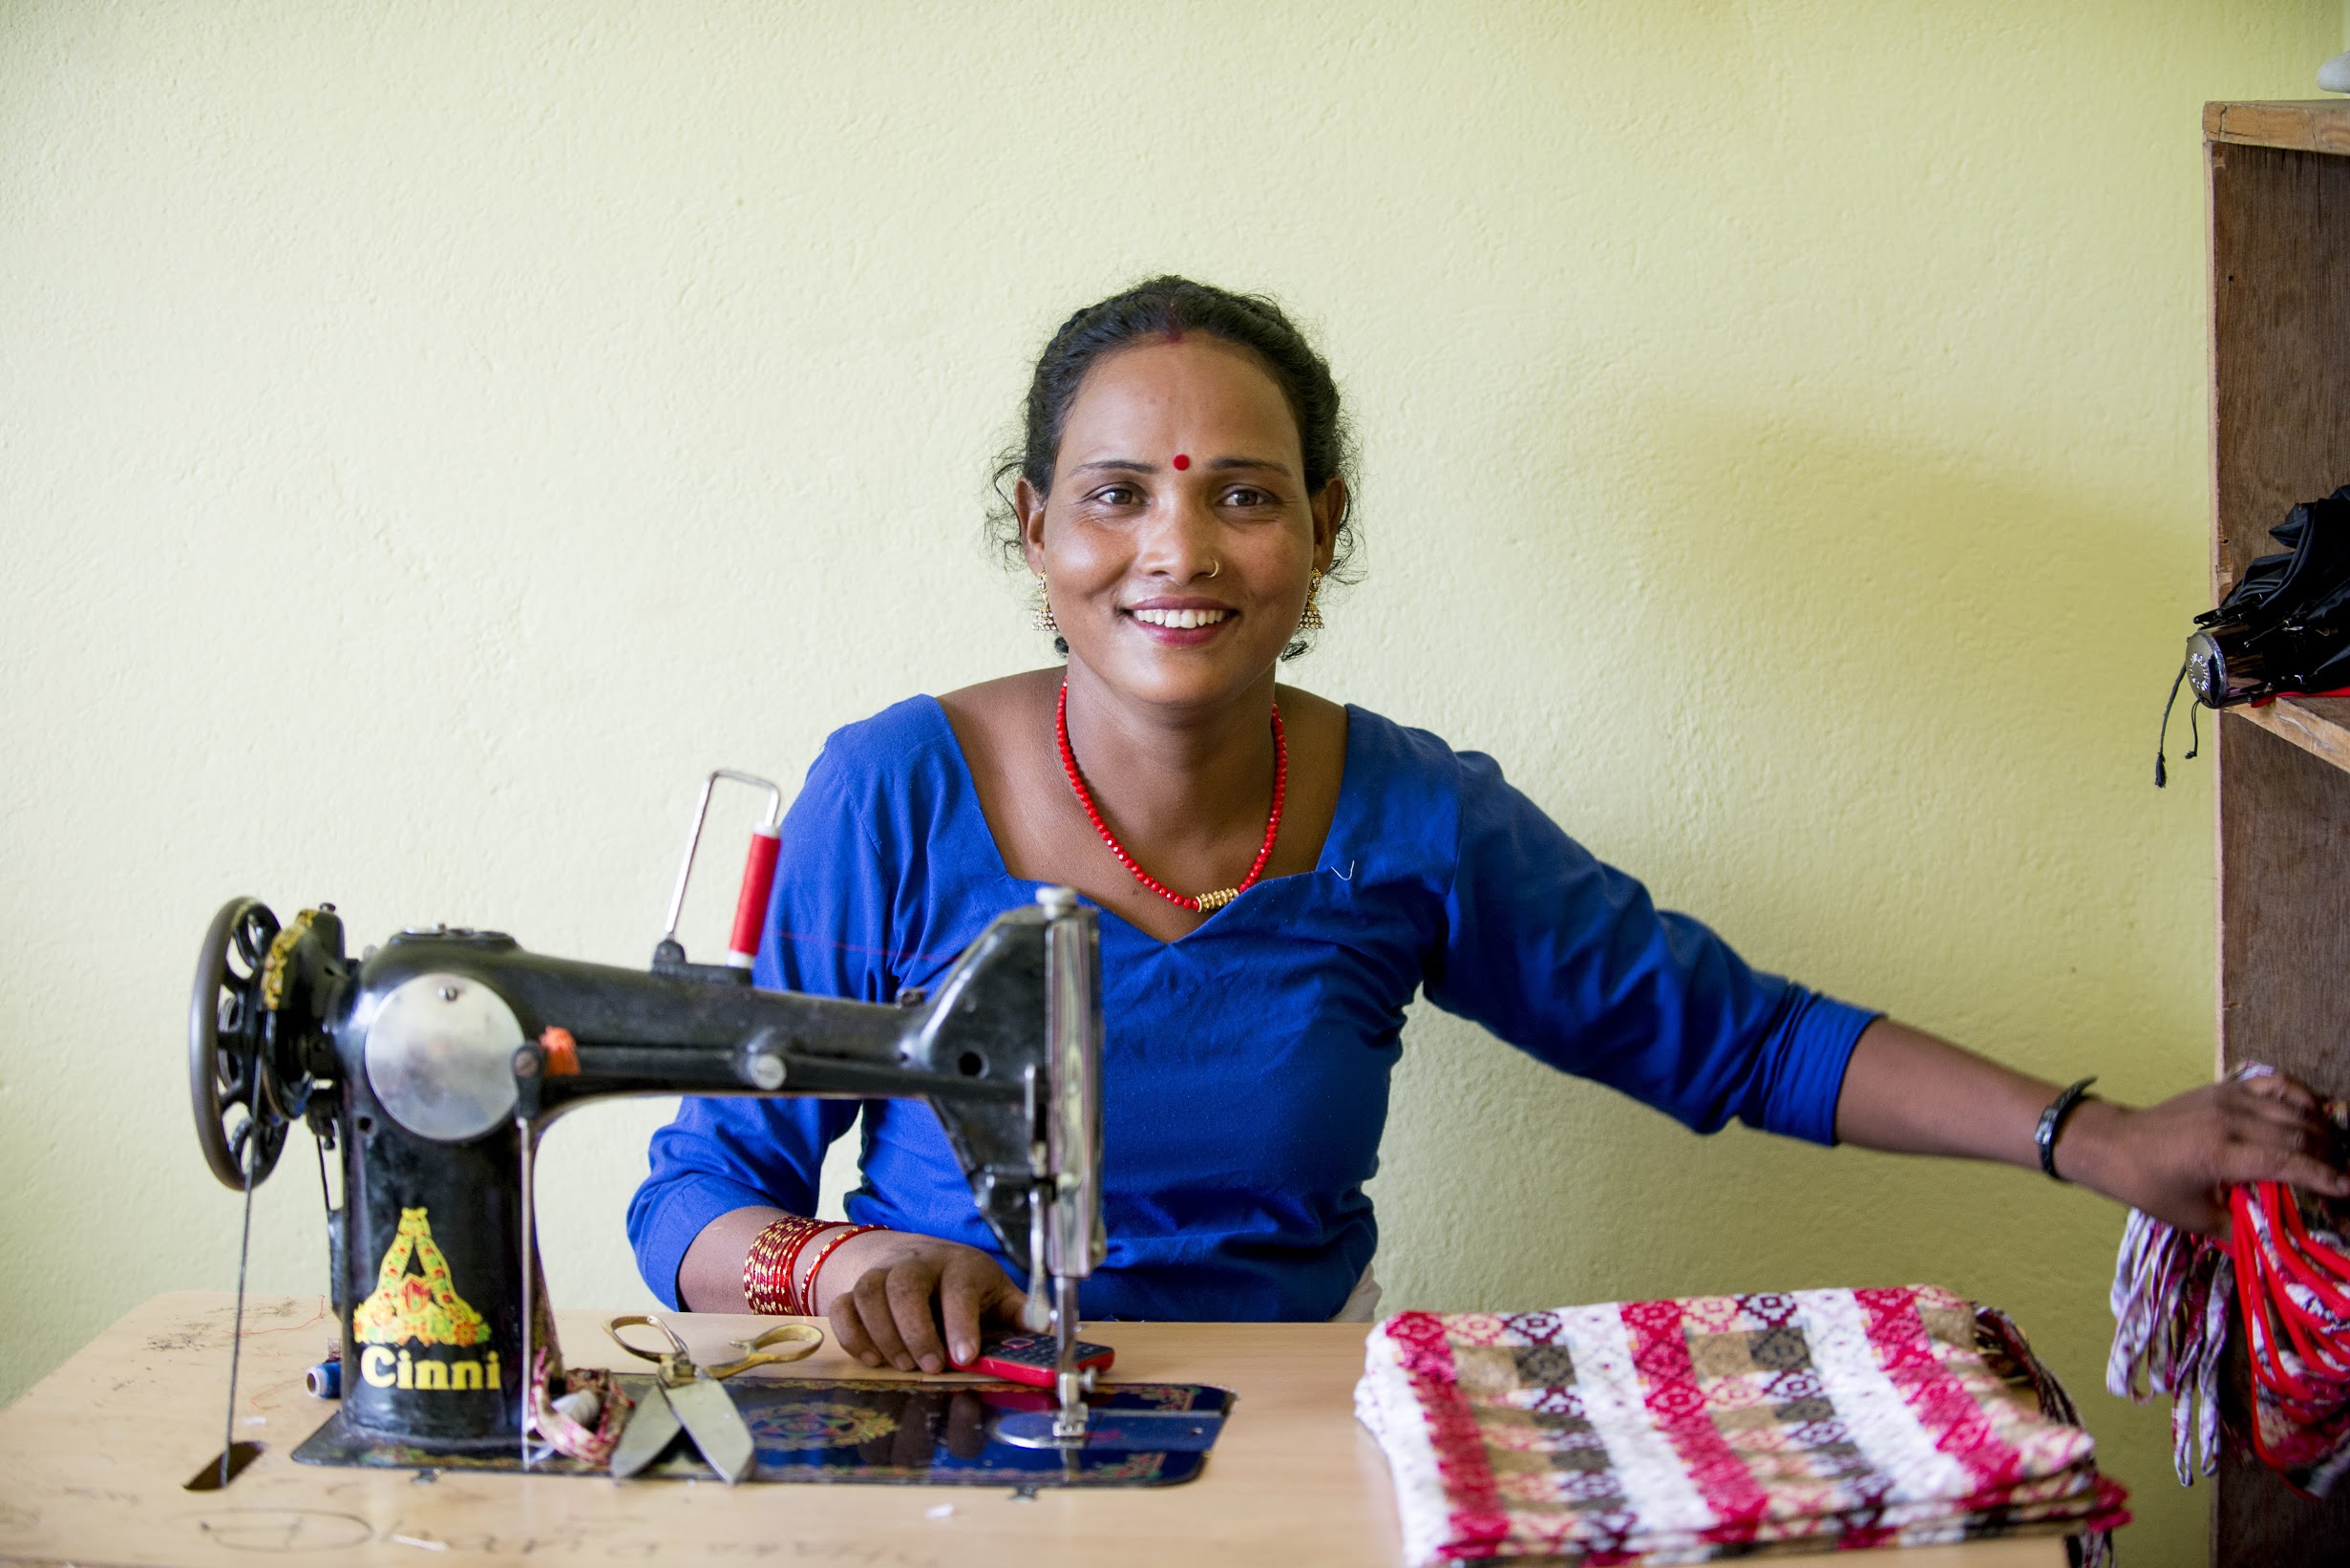 Dhana sewing at the Kopila Valley Women’s Center